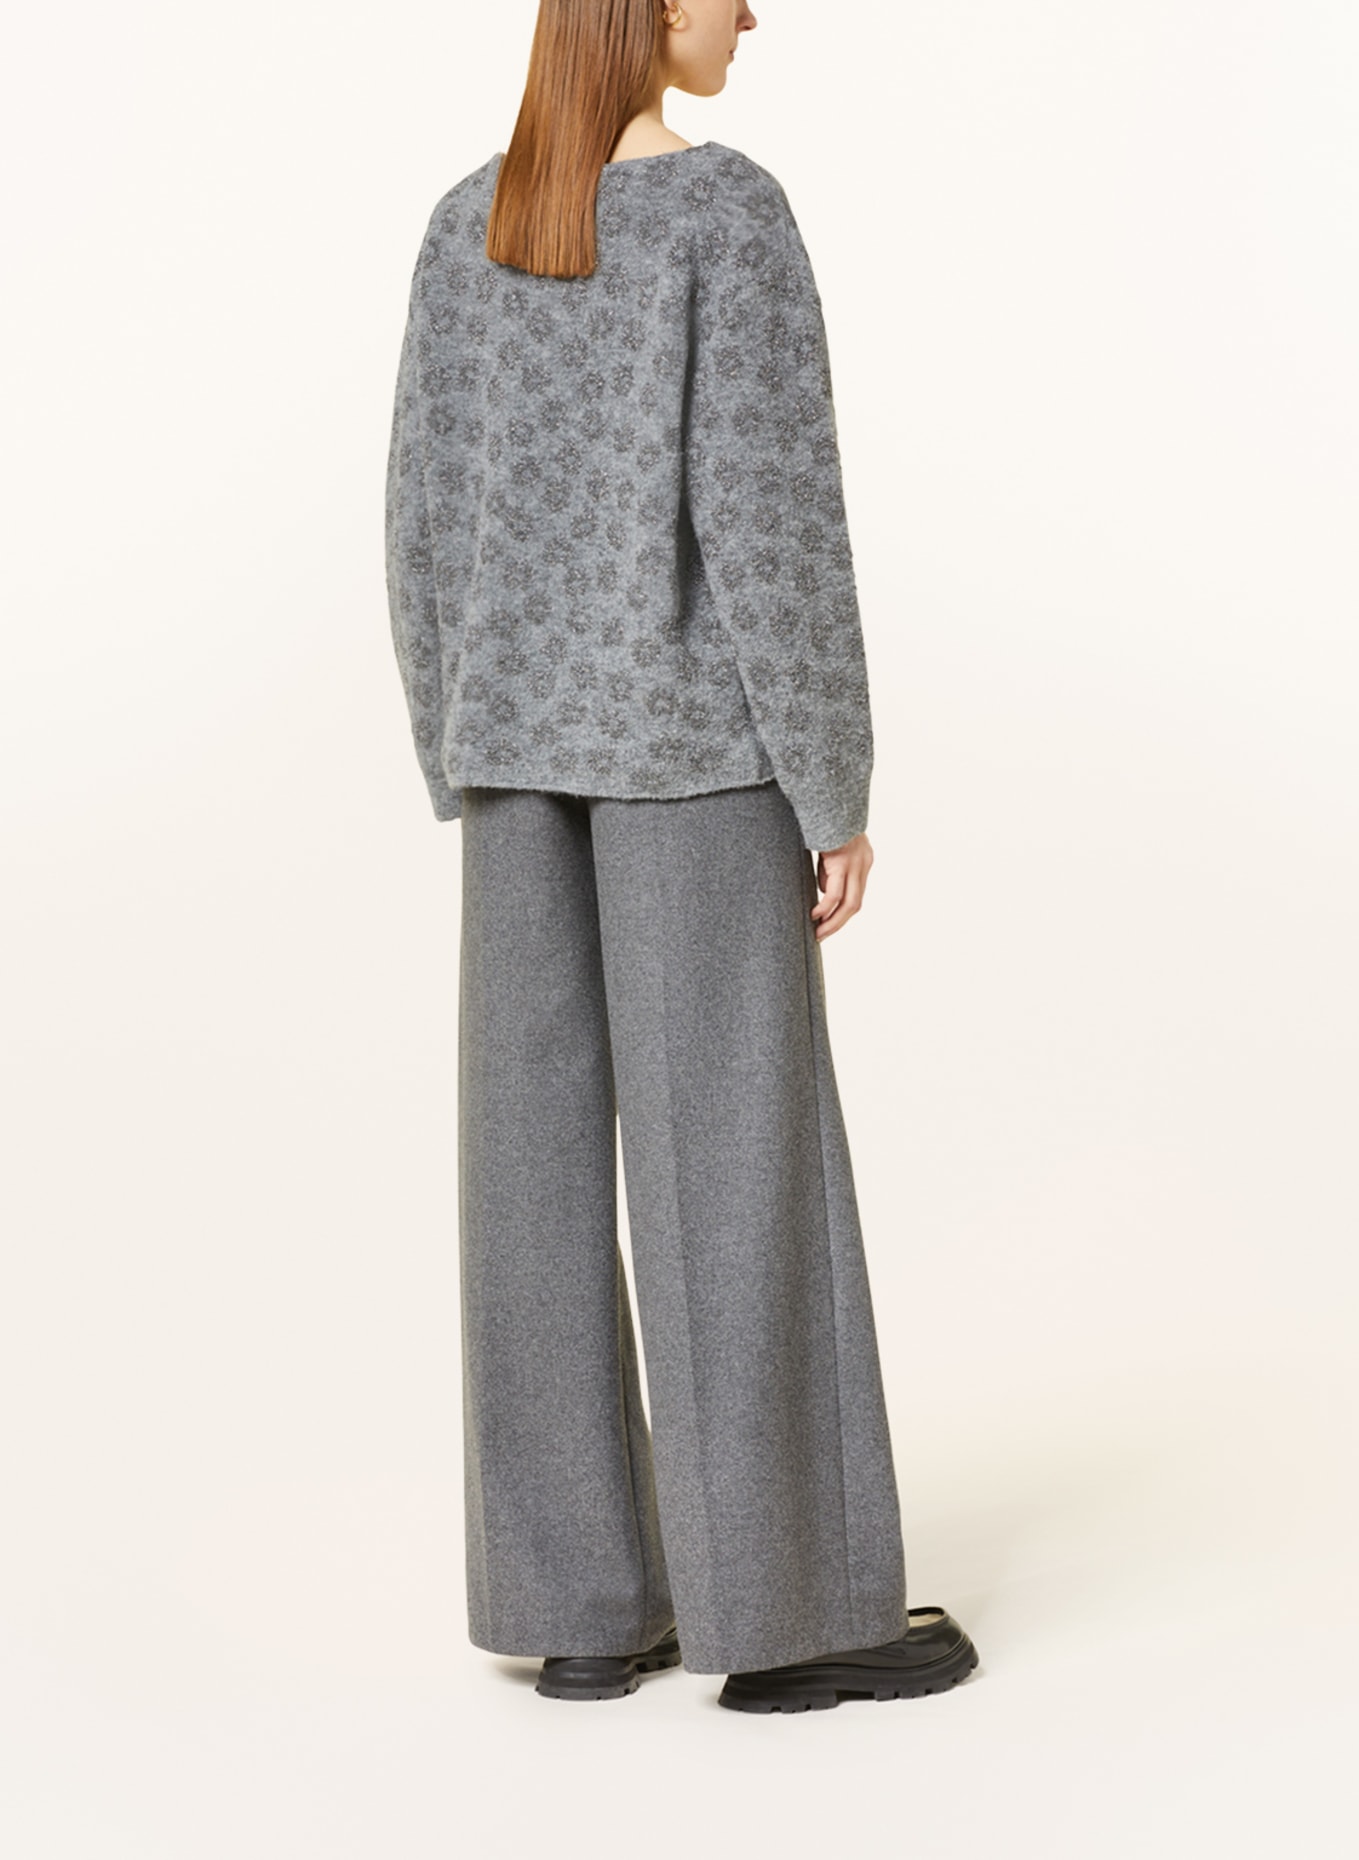 DOROTHEE SCHUMACHER Sweater with glitter thread, Color: GRAY/ SILVER (Image 3)